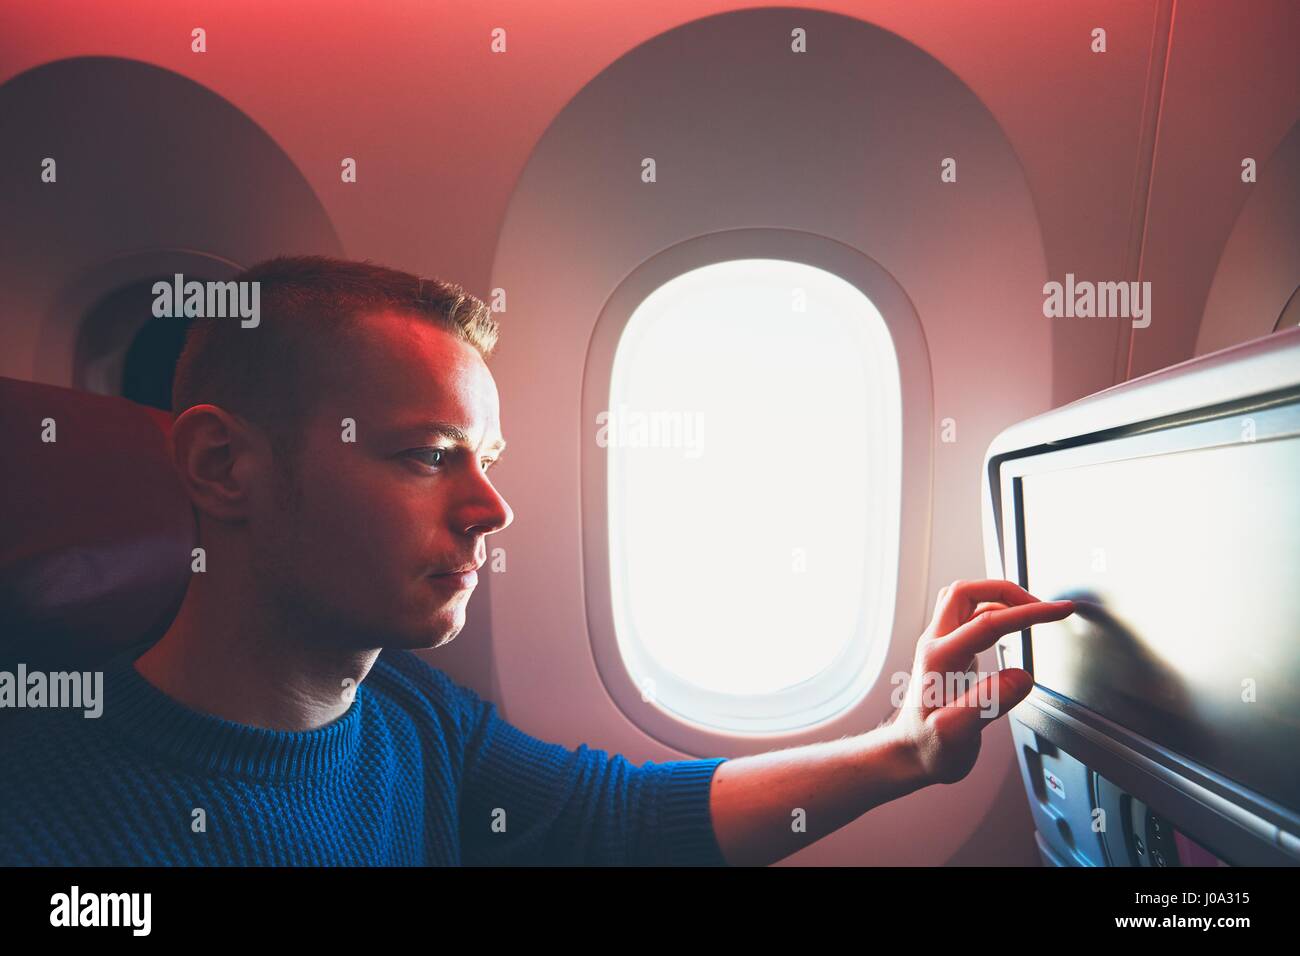 Comfortable traveling by airplane. Young passenger enjoying his journey inside an airplane. Stock Photo